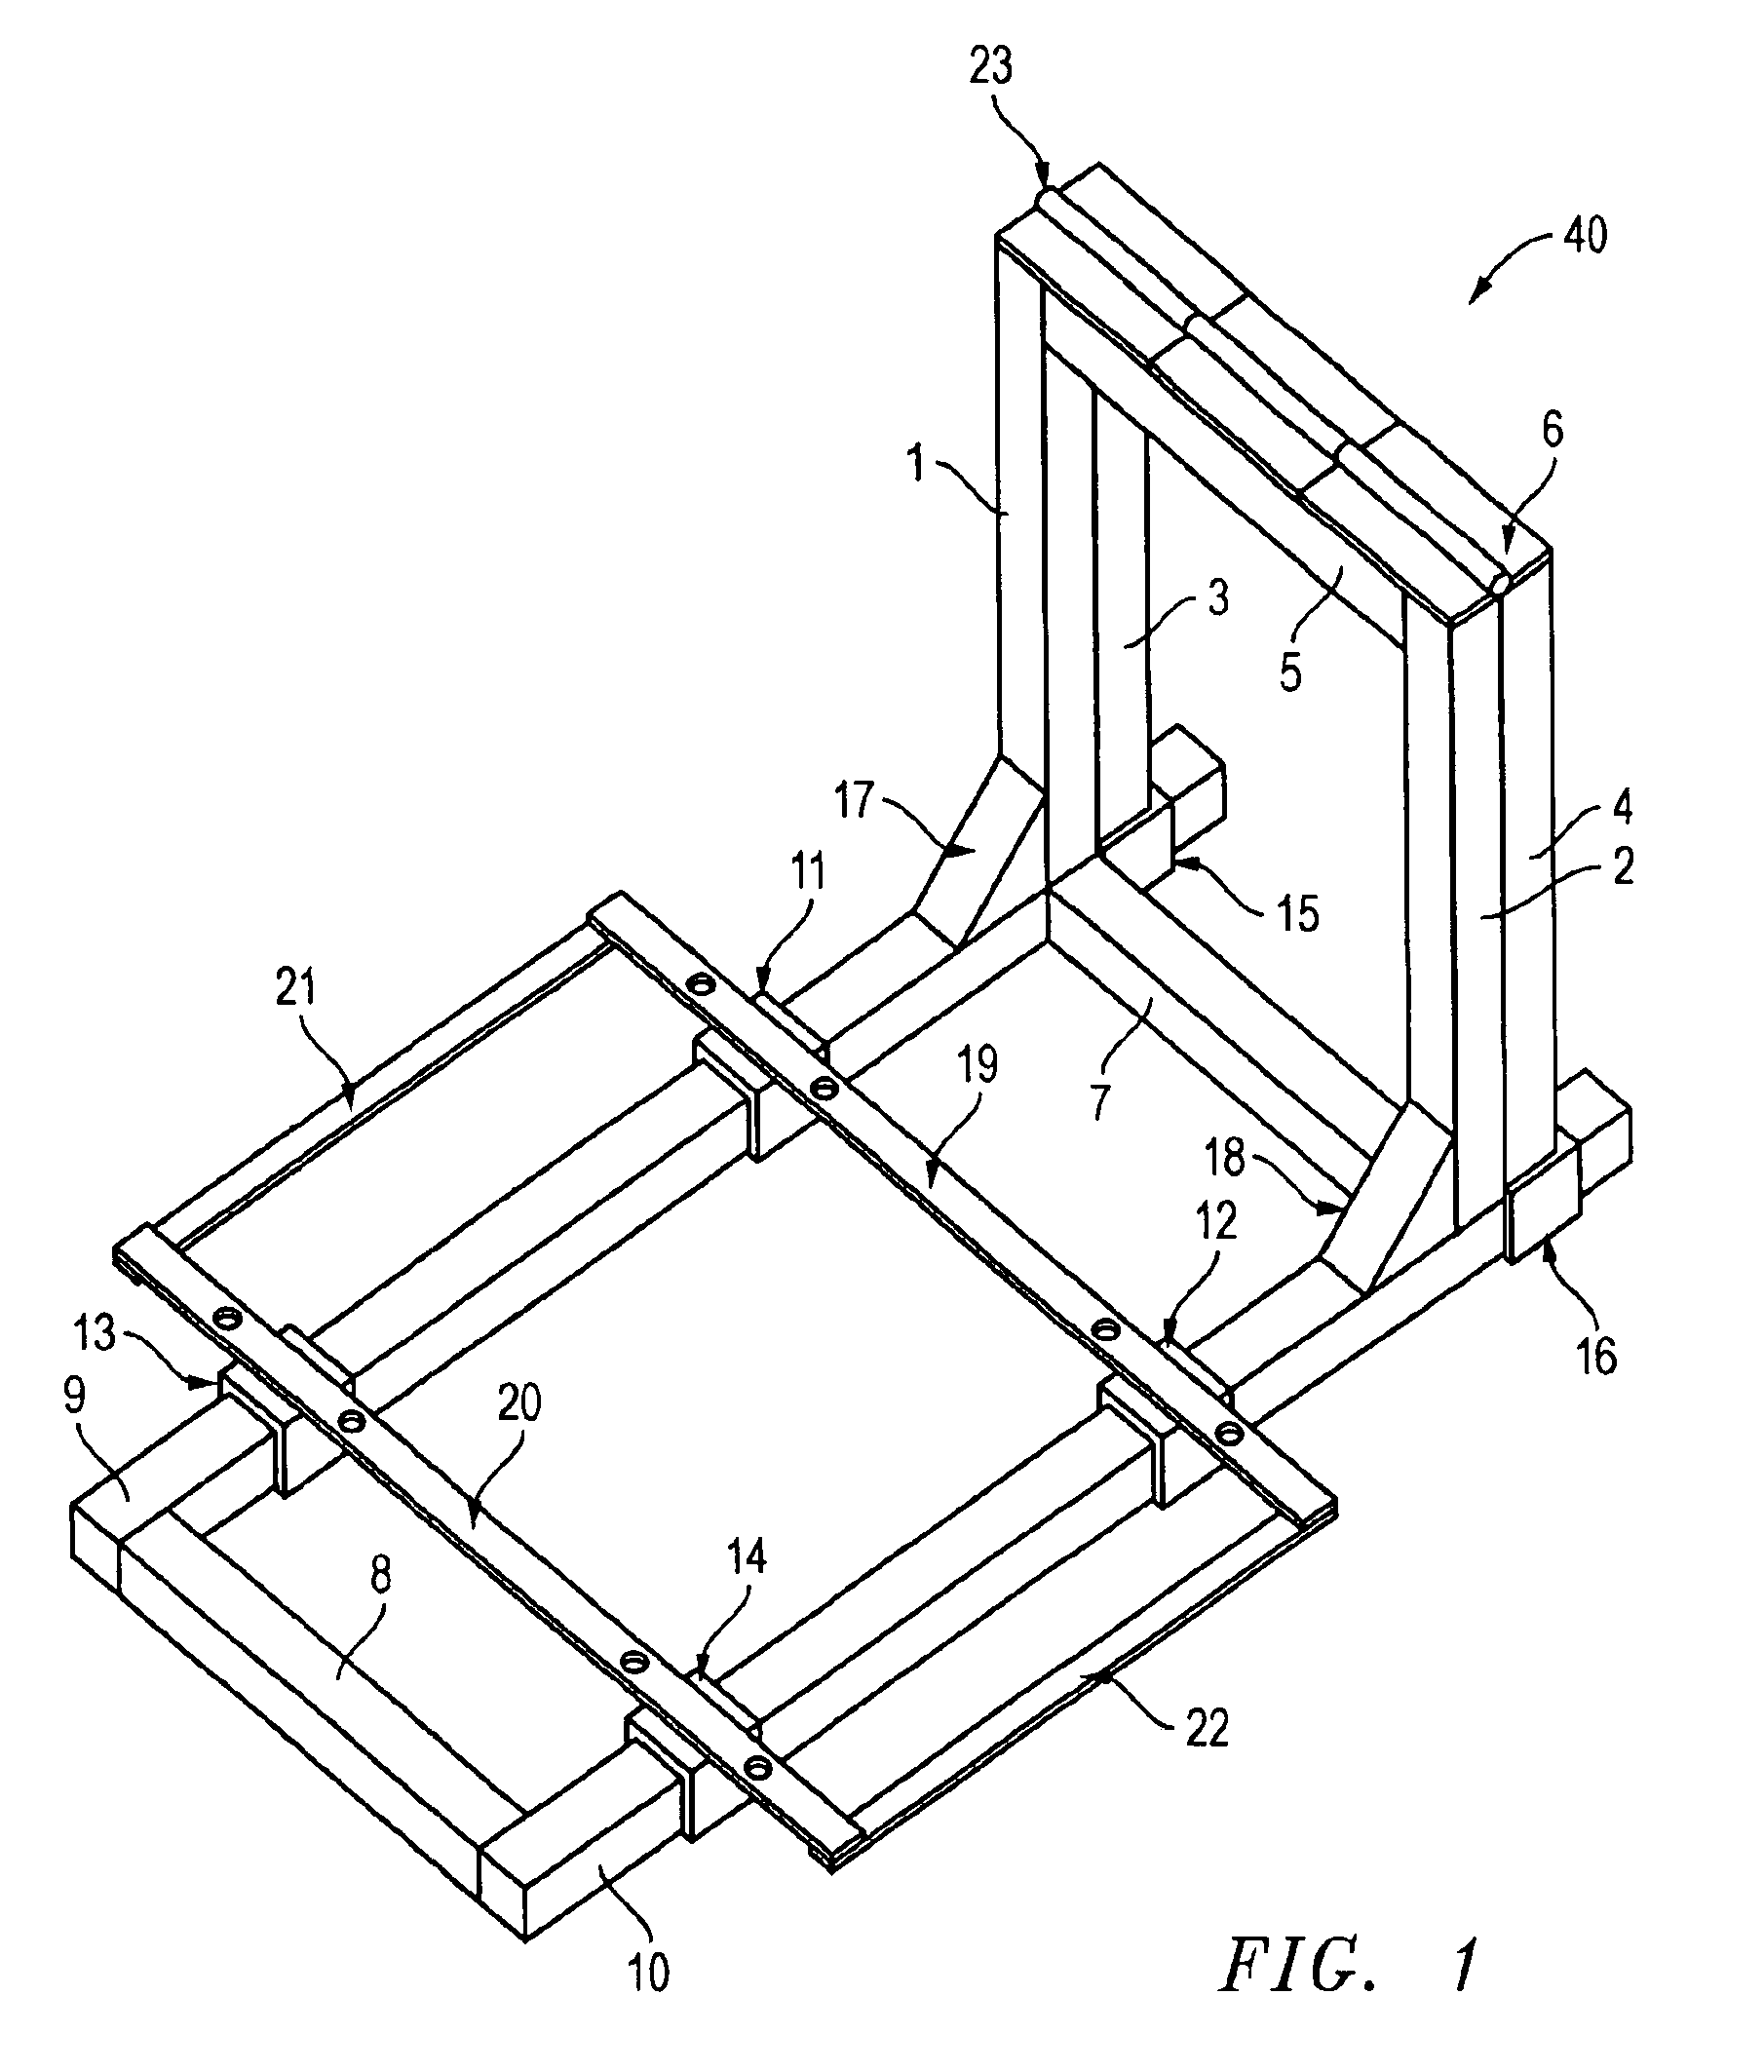 Hinged saw table, system, and method for forming and cutting an elongate workpiece